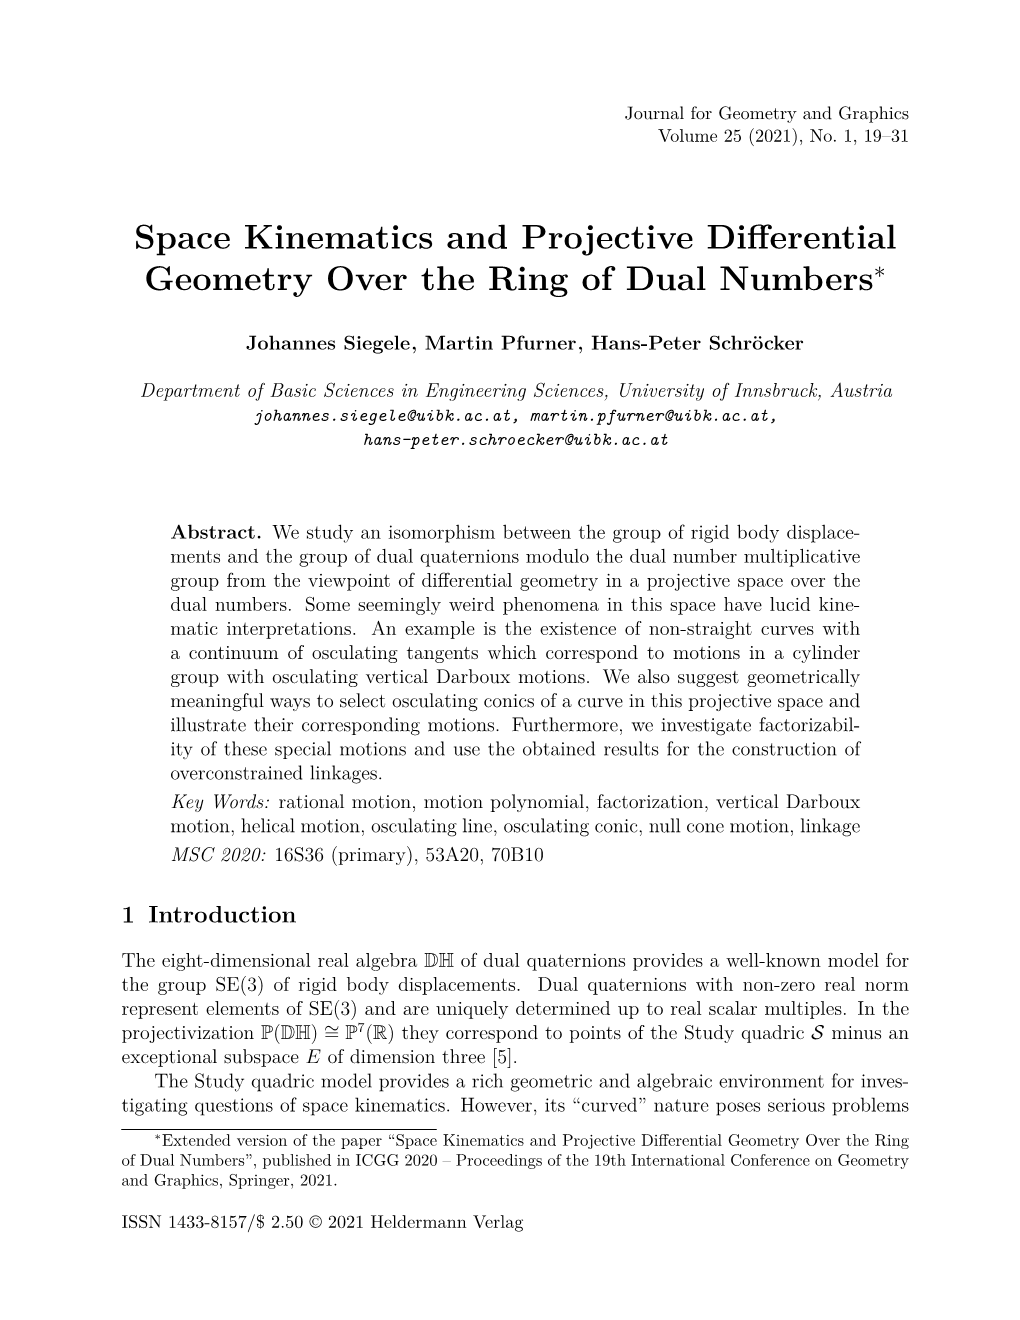 Space Kinematics and Projective Differential Geometry Over the Ring of Dual Numbers∗